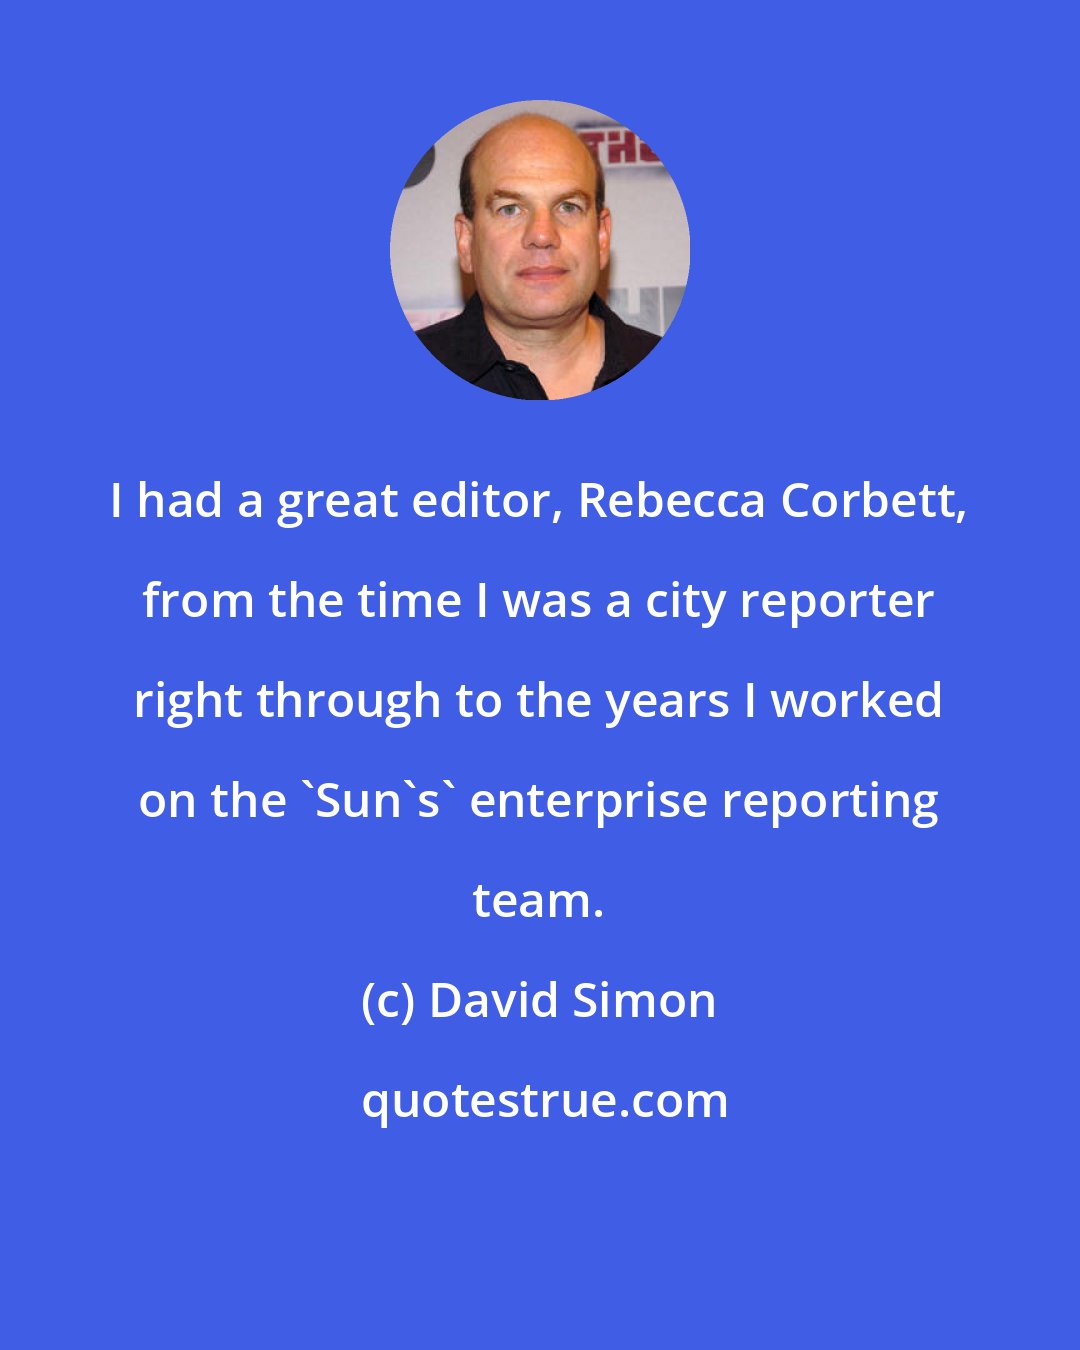 David Simon: I had a great editor, Rebecca Corbett, from the time I was a city reporter right through to the years I worked on the 'Sun's' enterprise reporting team.